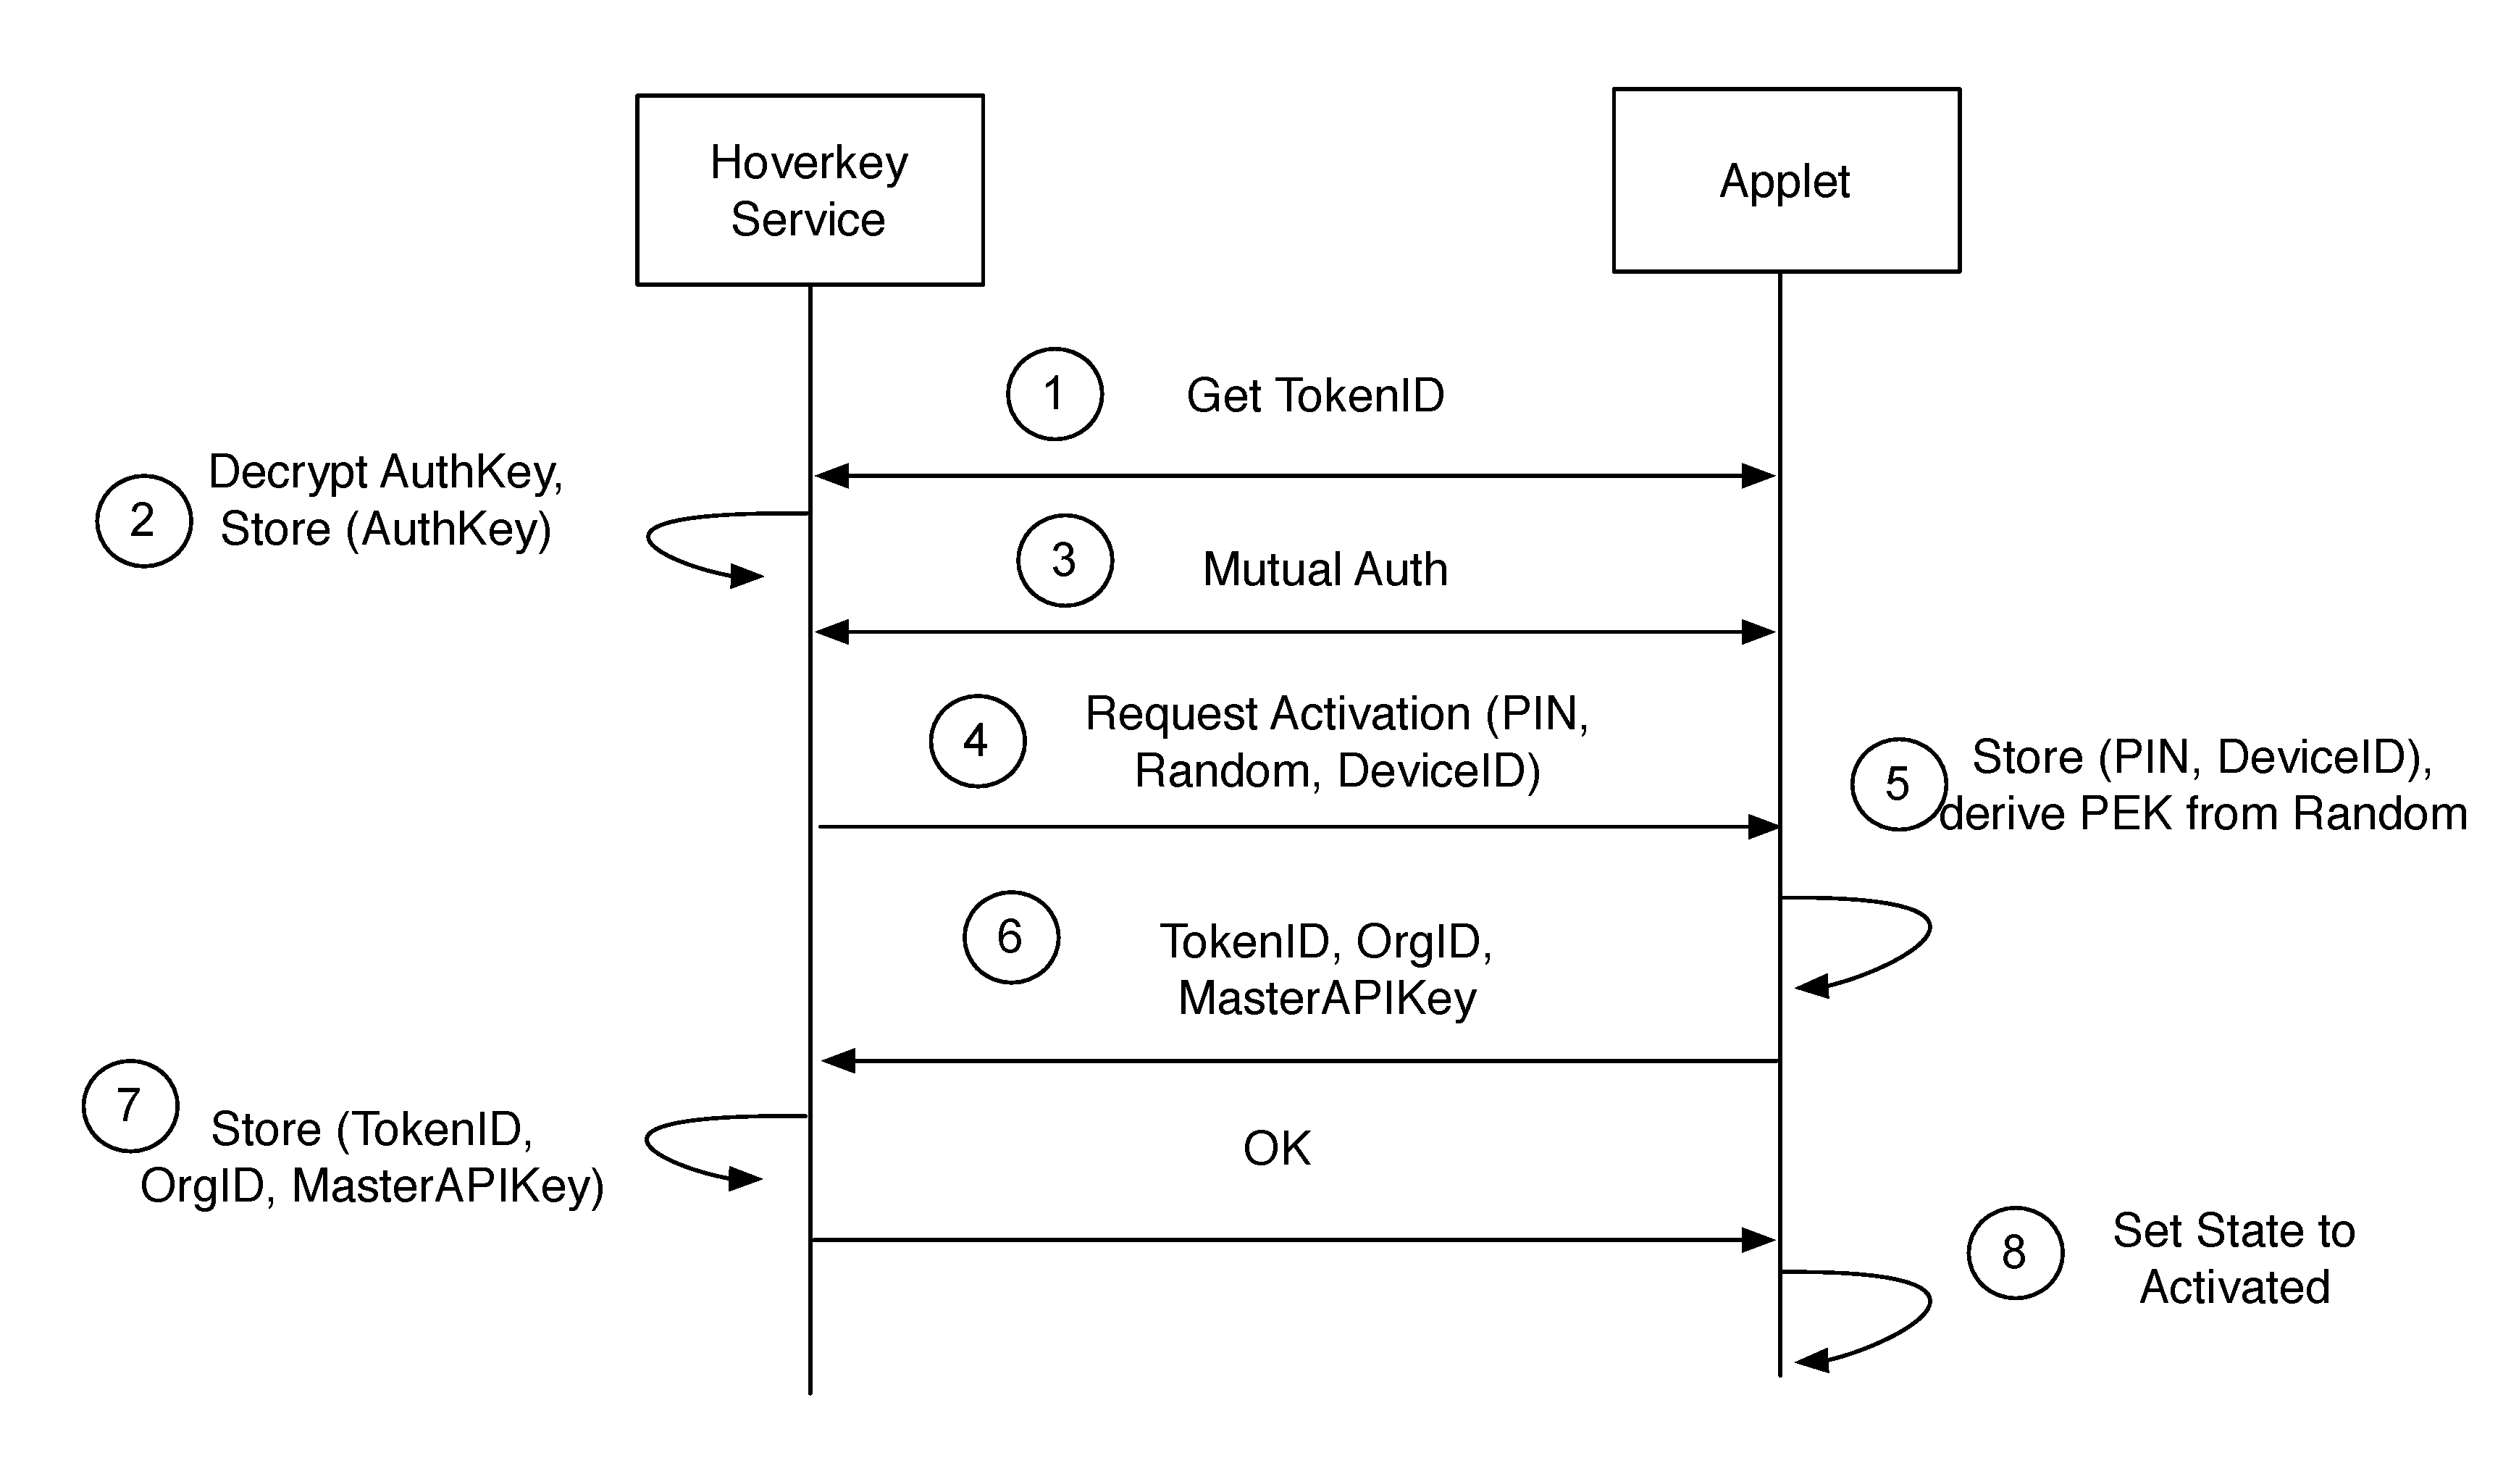 Method and system of providing authentication of user access to a computer resource via a mobile device using multiple separate security factors